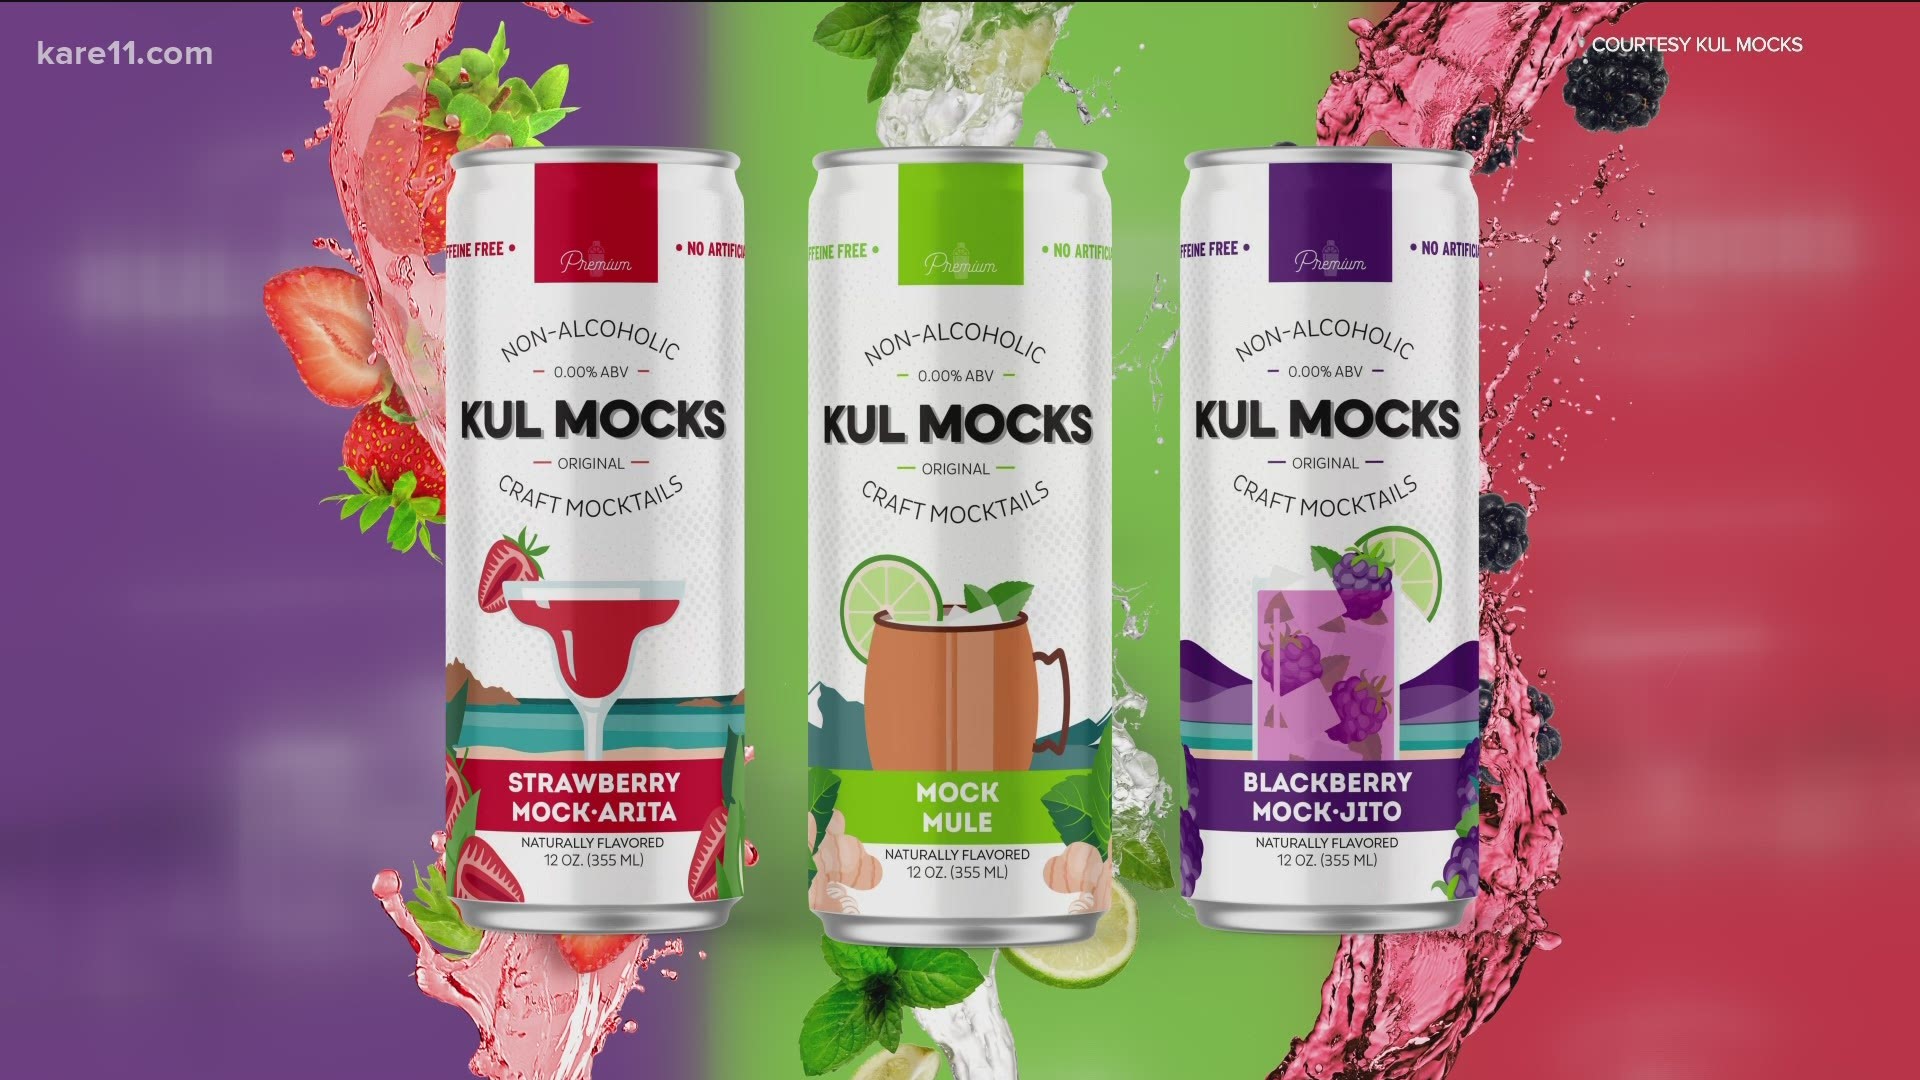 Heading for a "Dry January?" Craft "mocktail" maker KUL MOCKS is here to help you out.